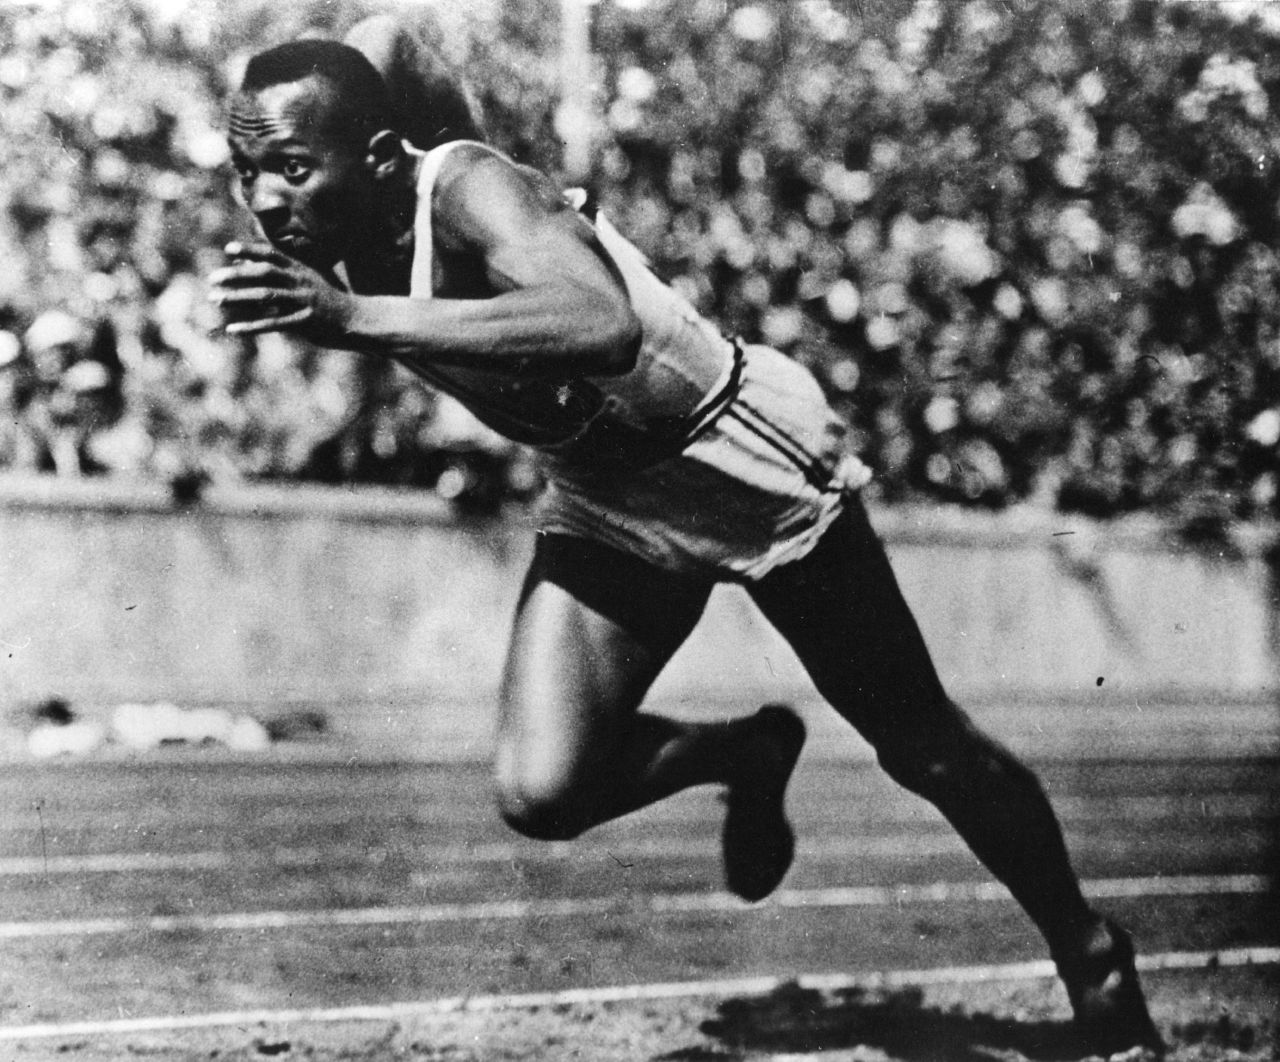 Jesse Owens was the star of the Berlin Games, winning four gold medals and shattering a number of world records. The American won the 100-yard and 200-yard dash as well as the long-jump. He also ran in the 4x100-yard relay despite protesting after two of his Jewish teammates were left out.